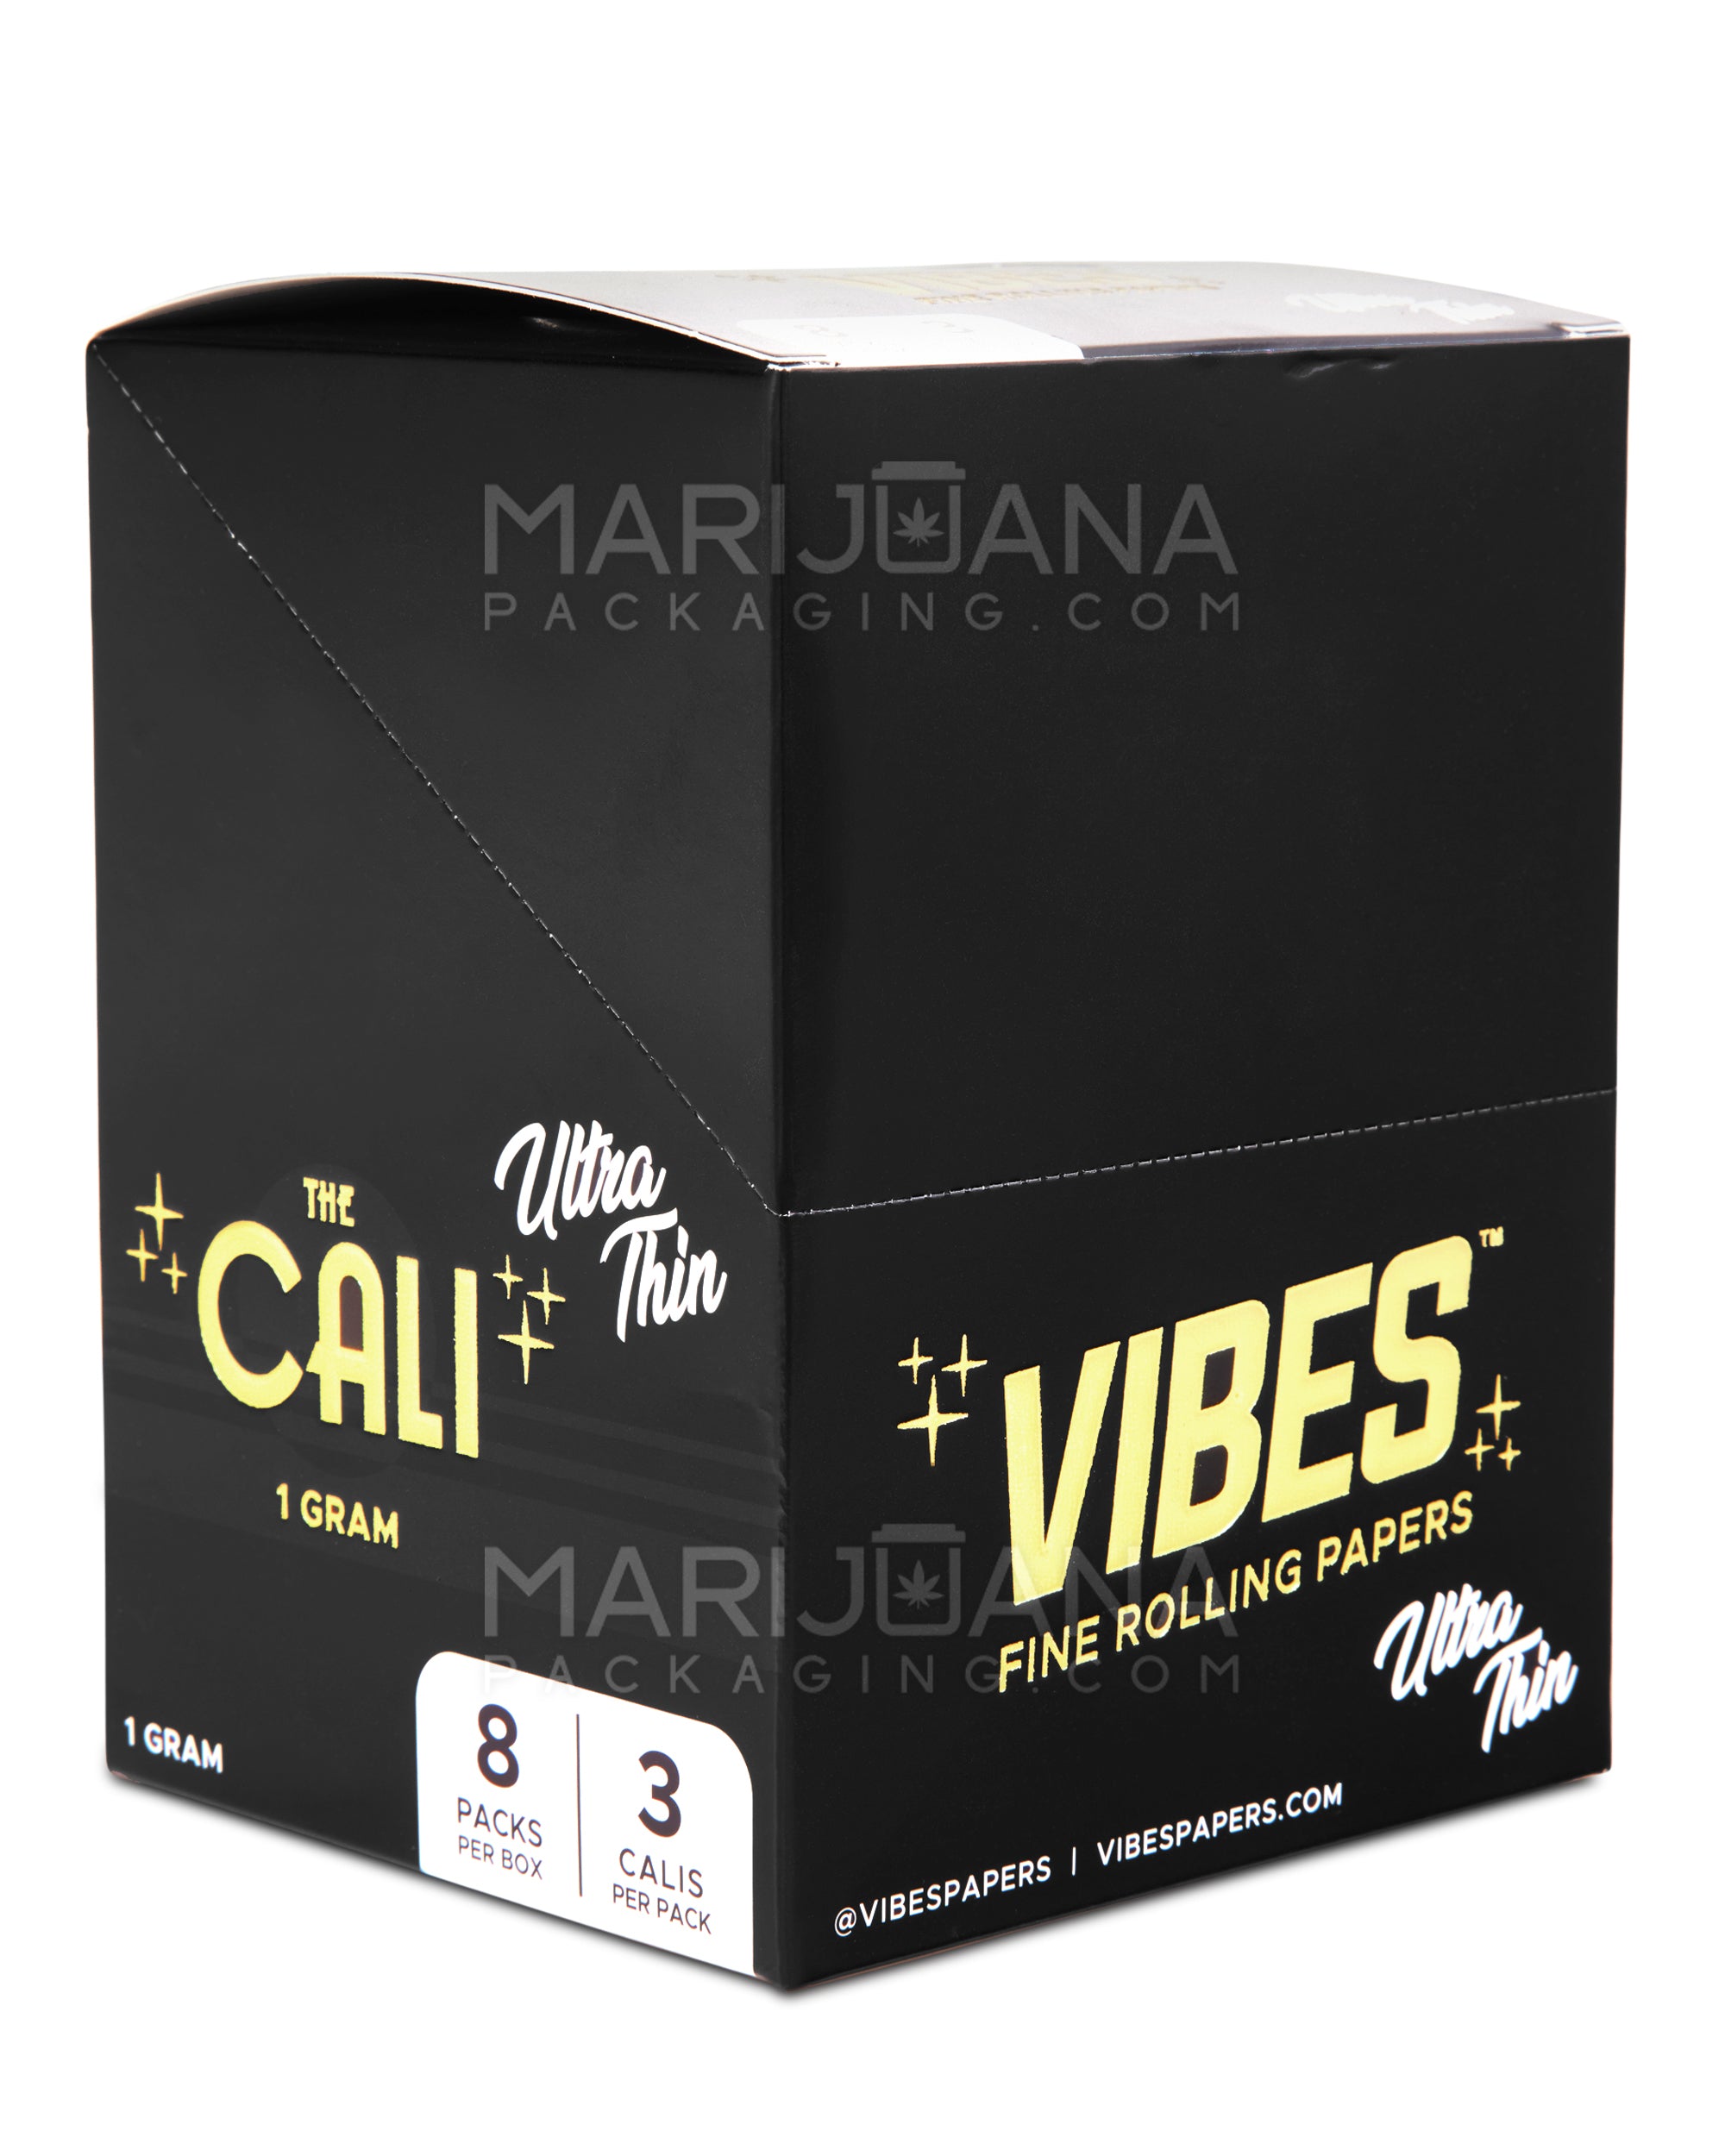 VIBES | 'Retail Display' The Cali 1 Gram Pre-Rolled Cones | 110mm - Ultra Thin Paper - 24 Count - 6